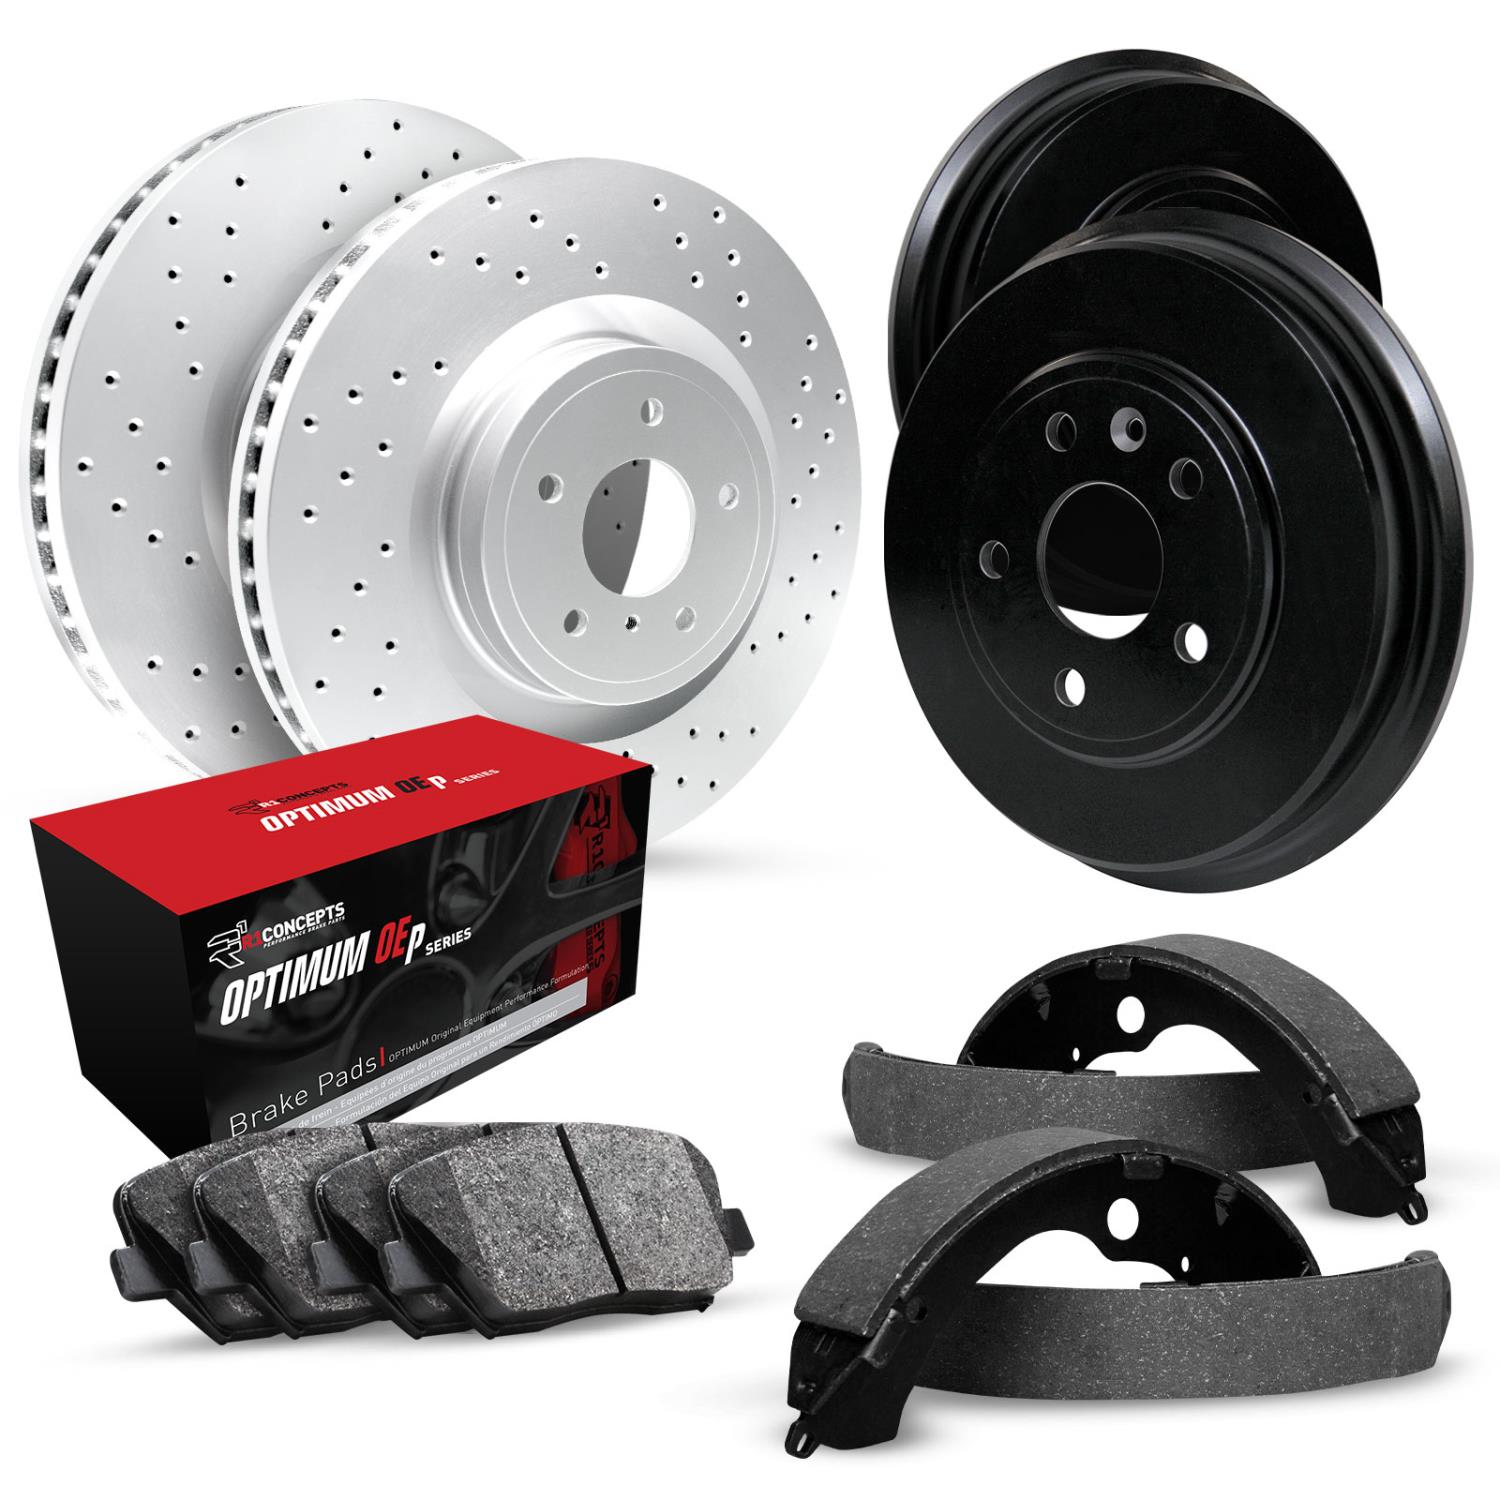 GEO-Carbon Drilled Brake Rotor & Drum Set w/Optimum OE Pads & Shoes, 1979-1980 GM, Position: Front & Rear